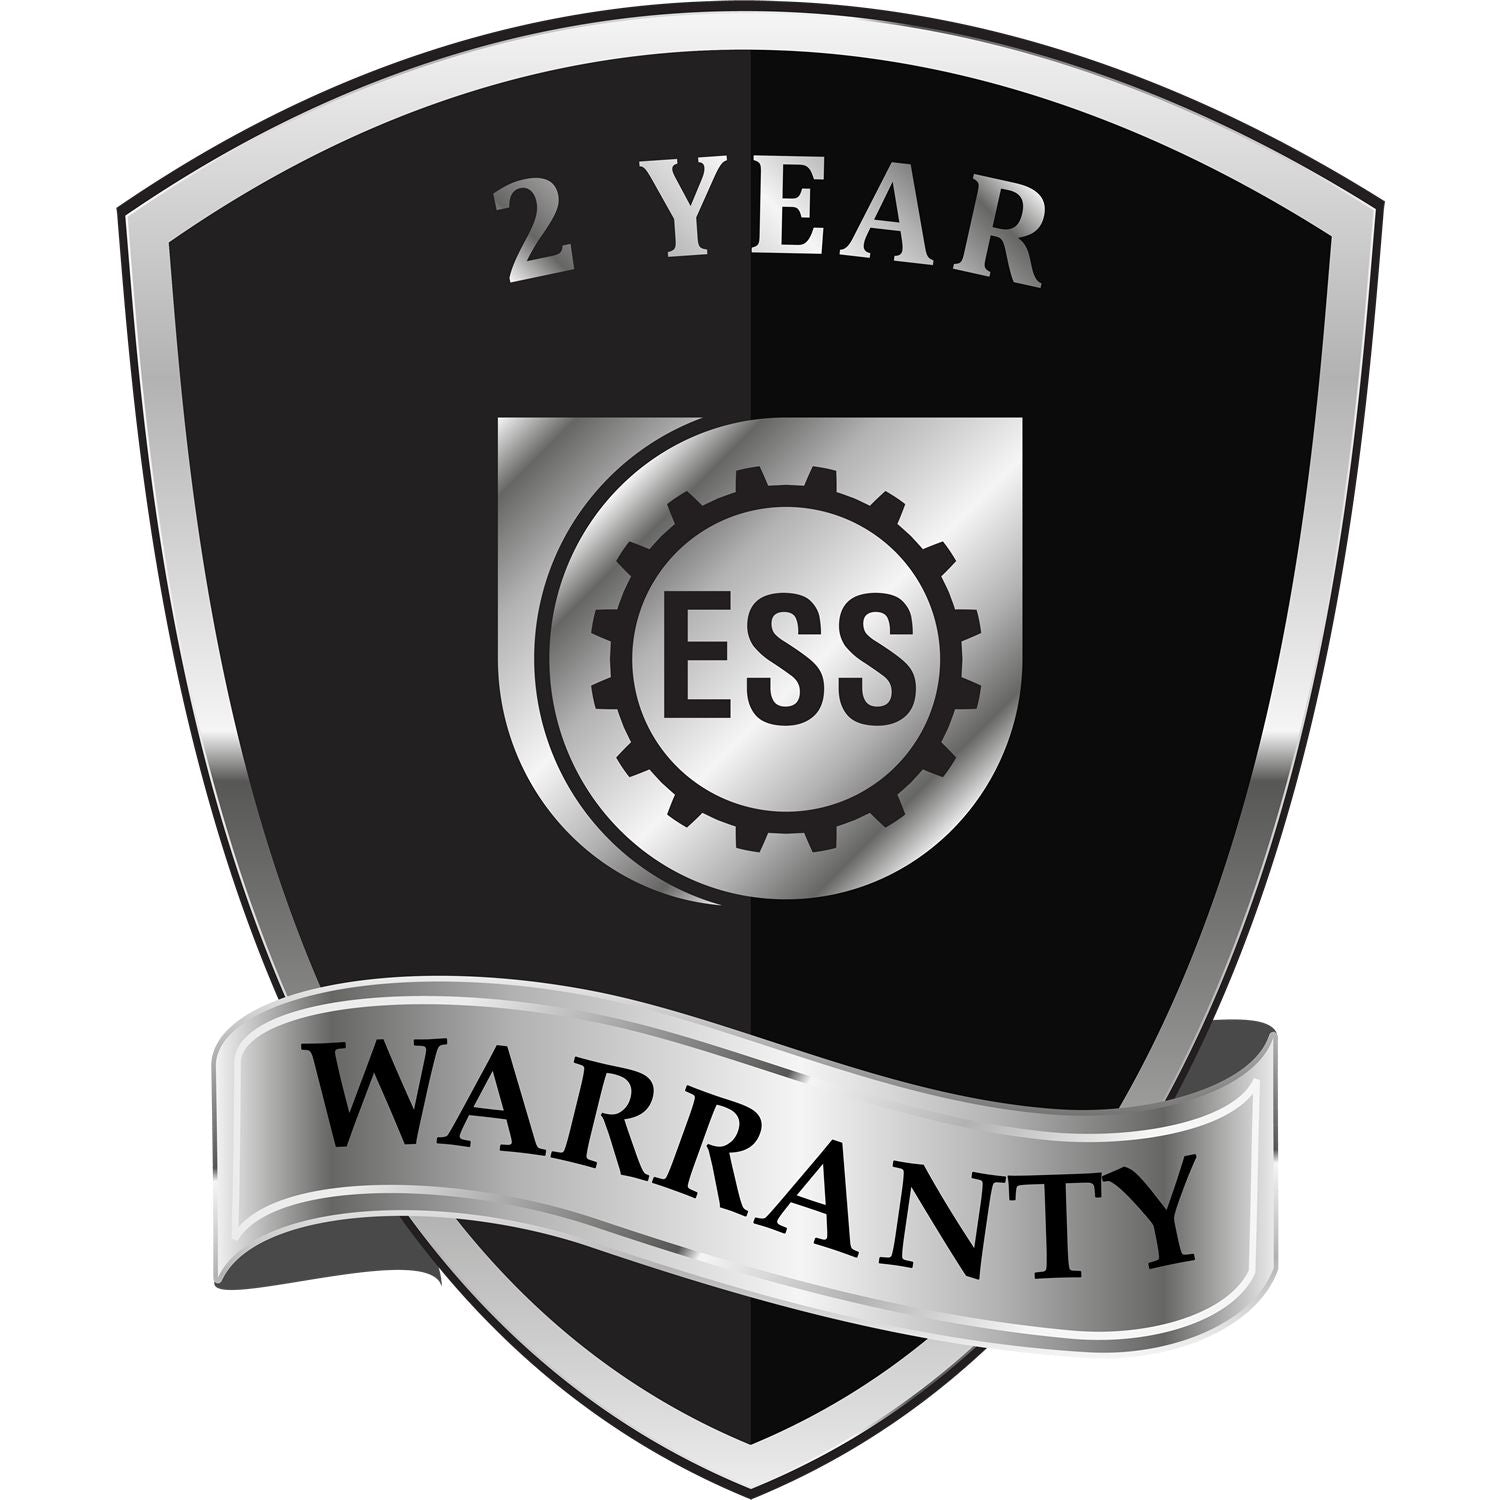 A badge or emblem showing a warranty icon for the Heavy Duty Cast Iron Virginia Land Surveyor Seal Embosser